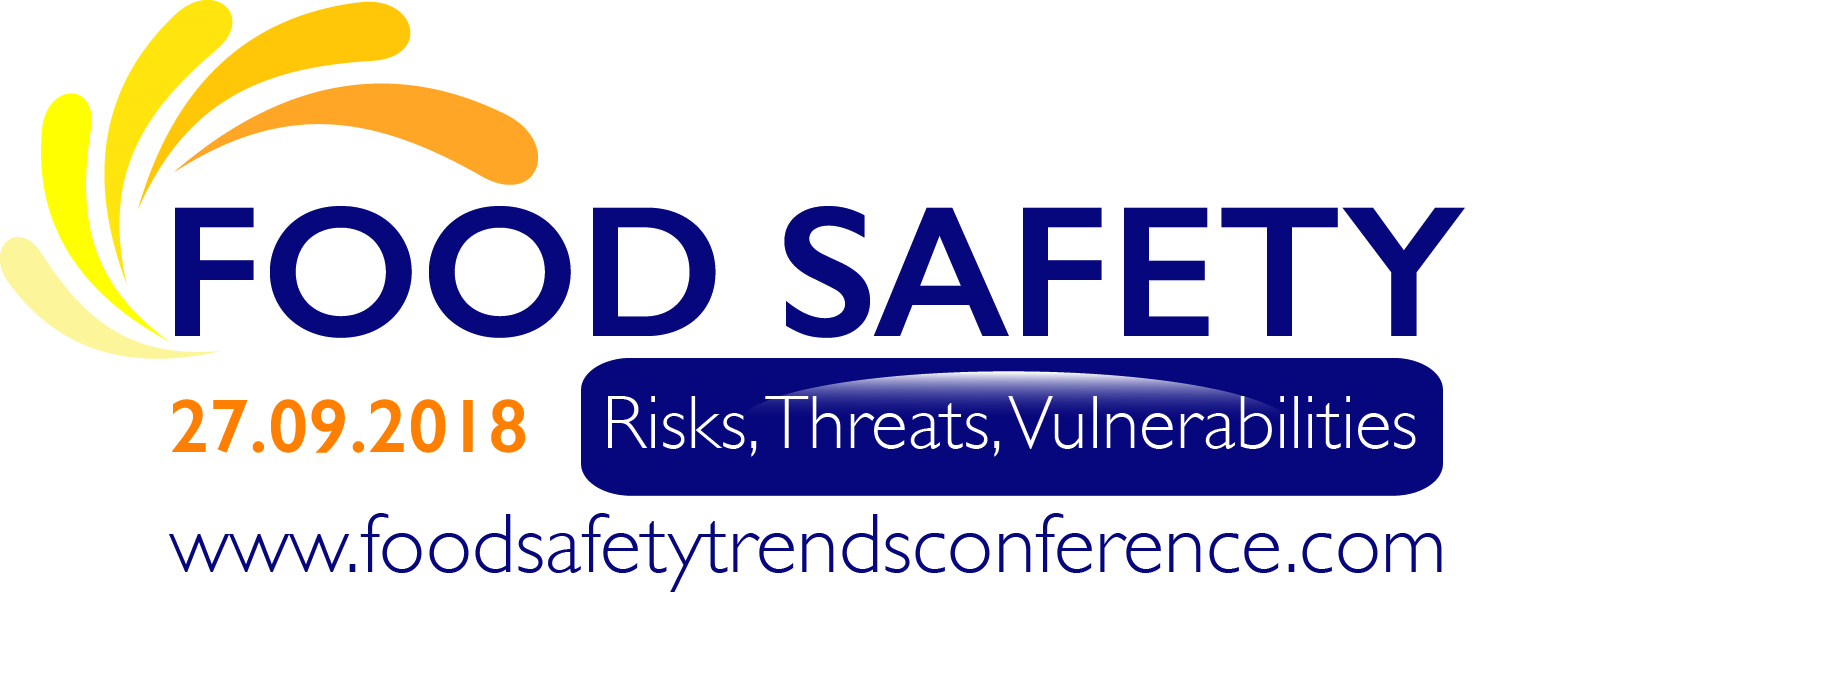 The Food Safety Conference - Risks, Threats, Vulnerabilities